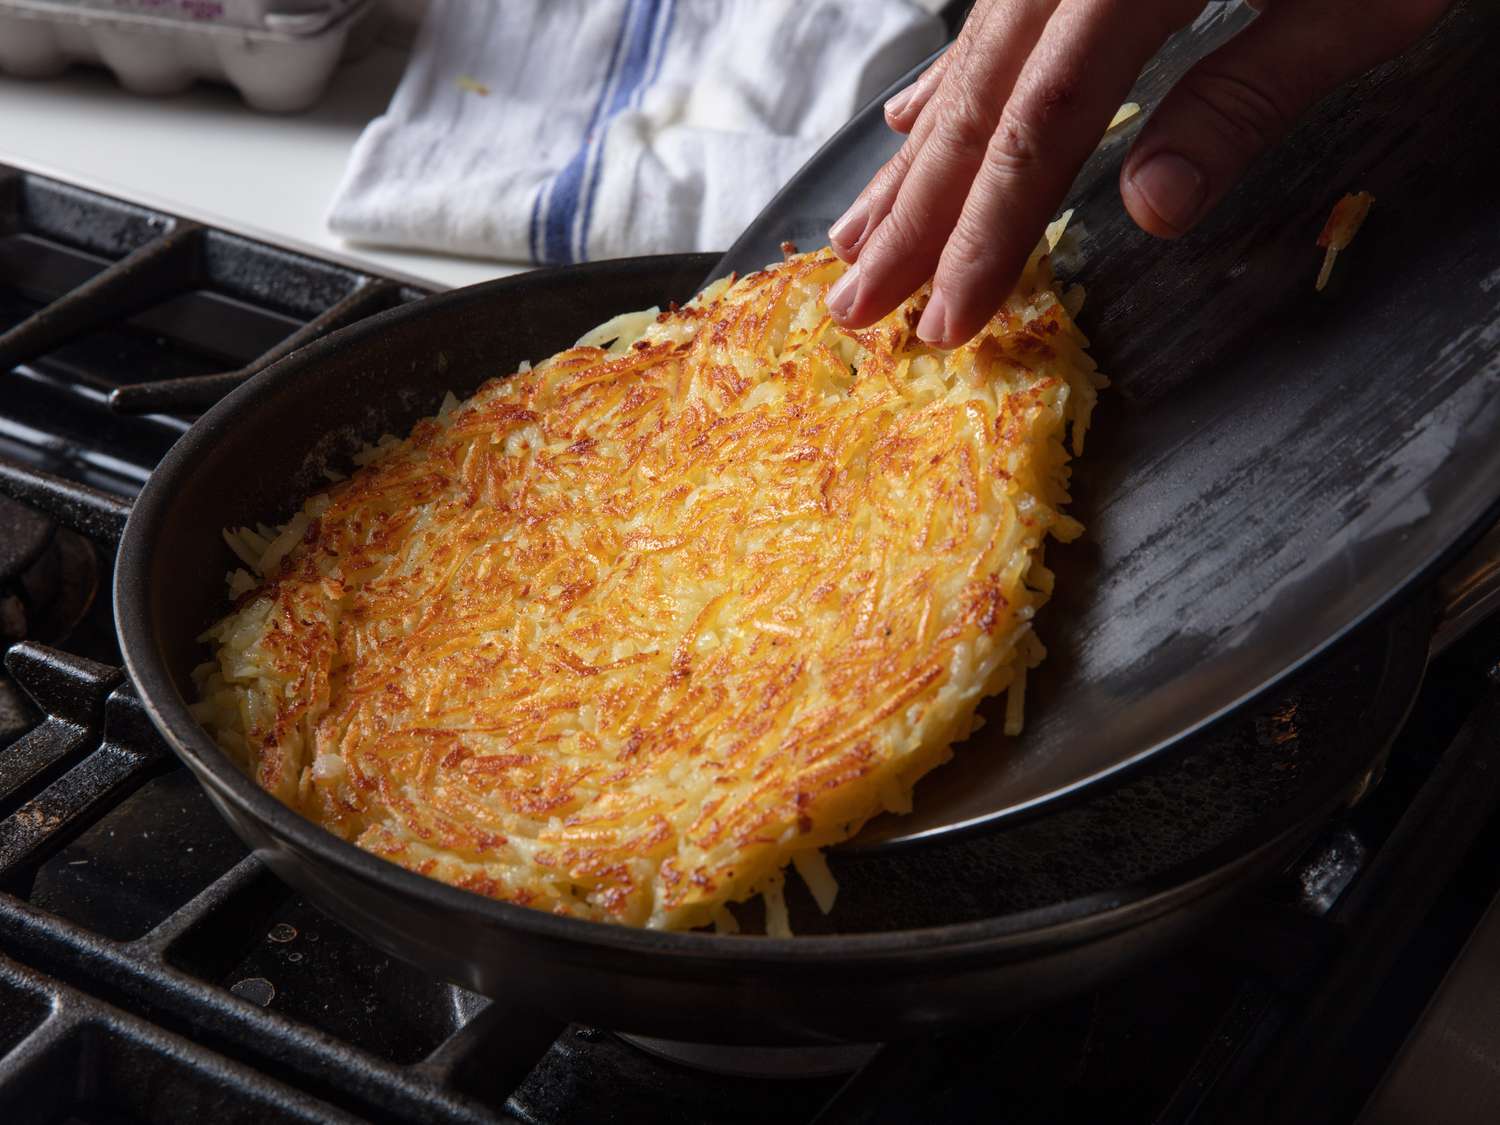 Sliding the flipped rÃ¶sti from a plate back into the skillet to brown the second side.